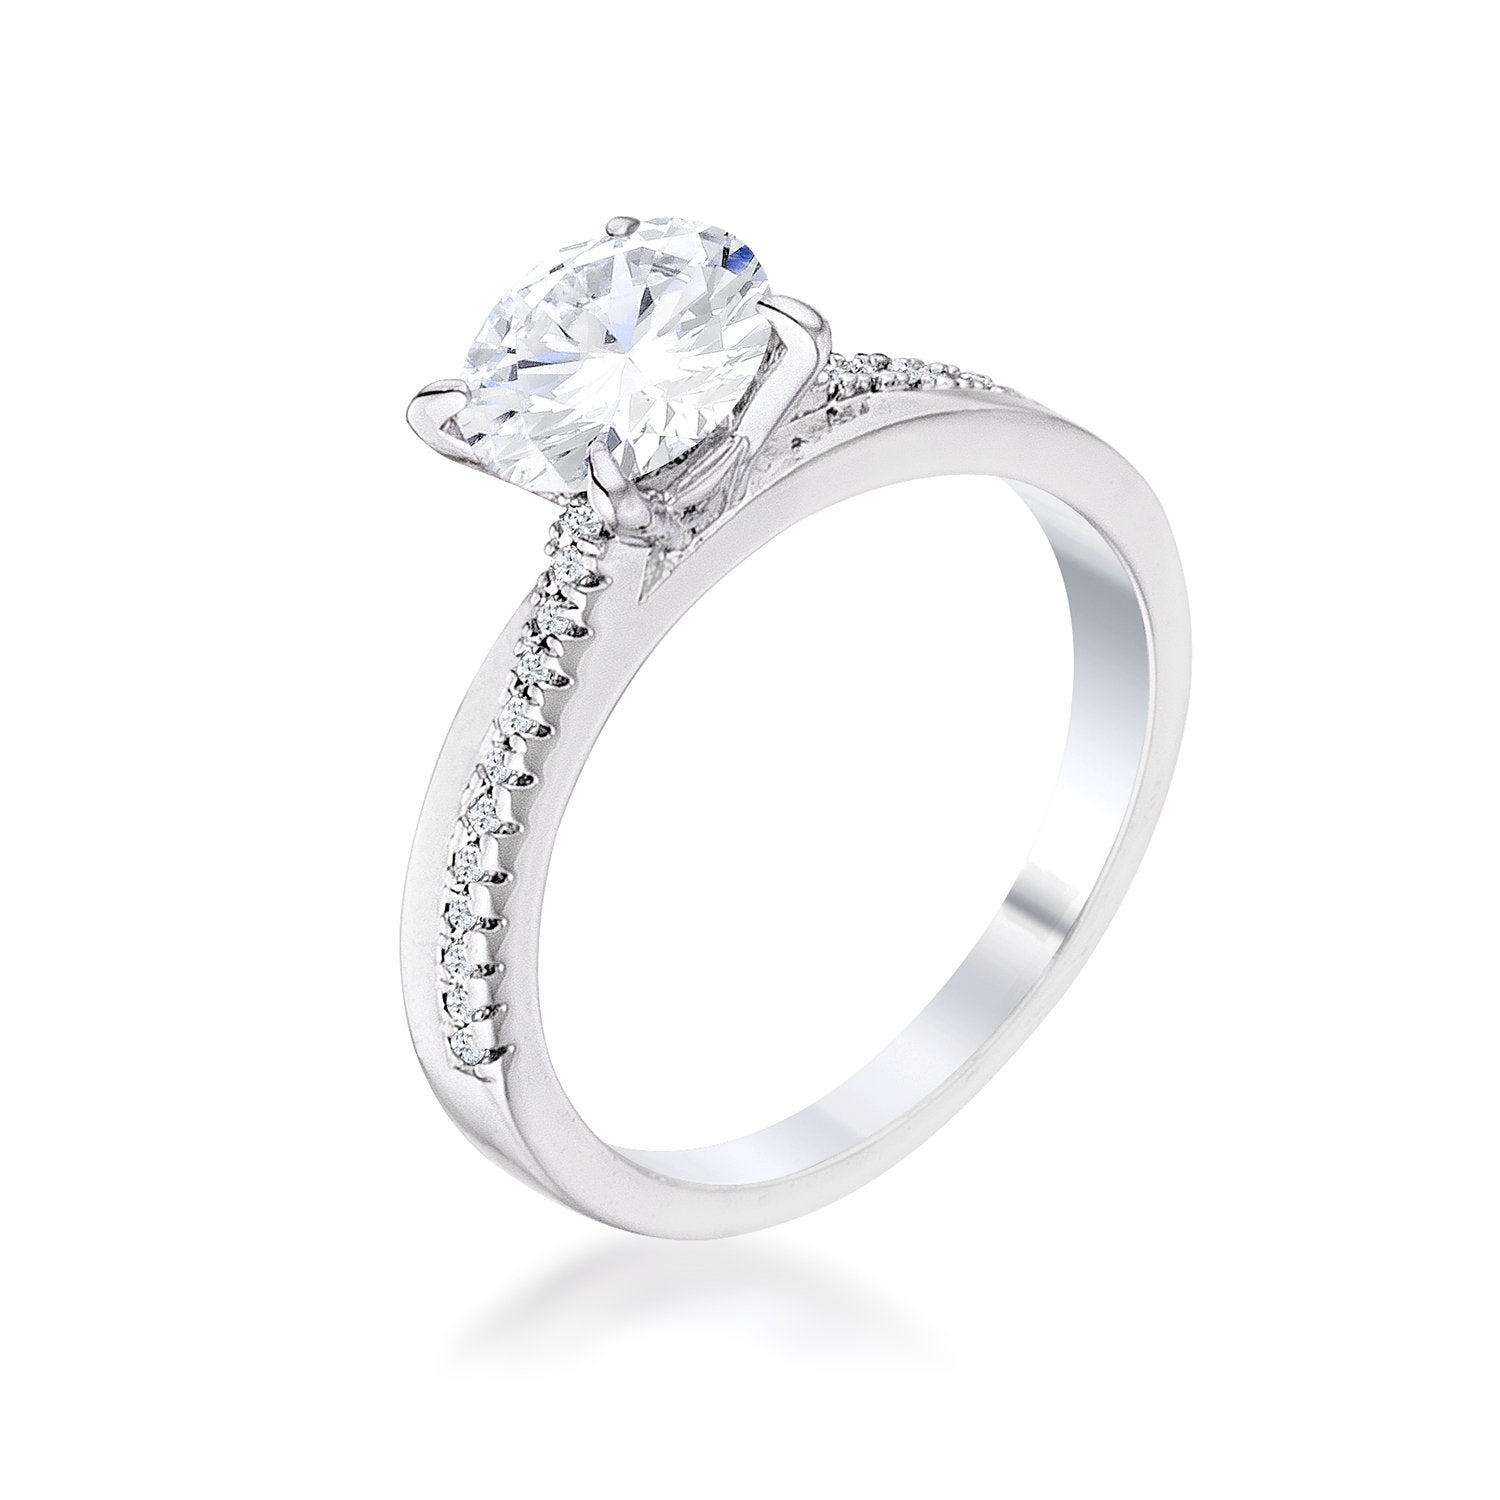 1.4Ct Contemporary Dainty Rhodium Plated Clear CZ Engagement Ring - R08571R-C01